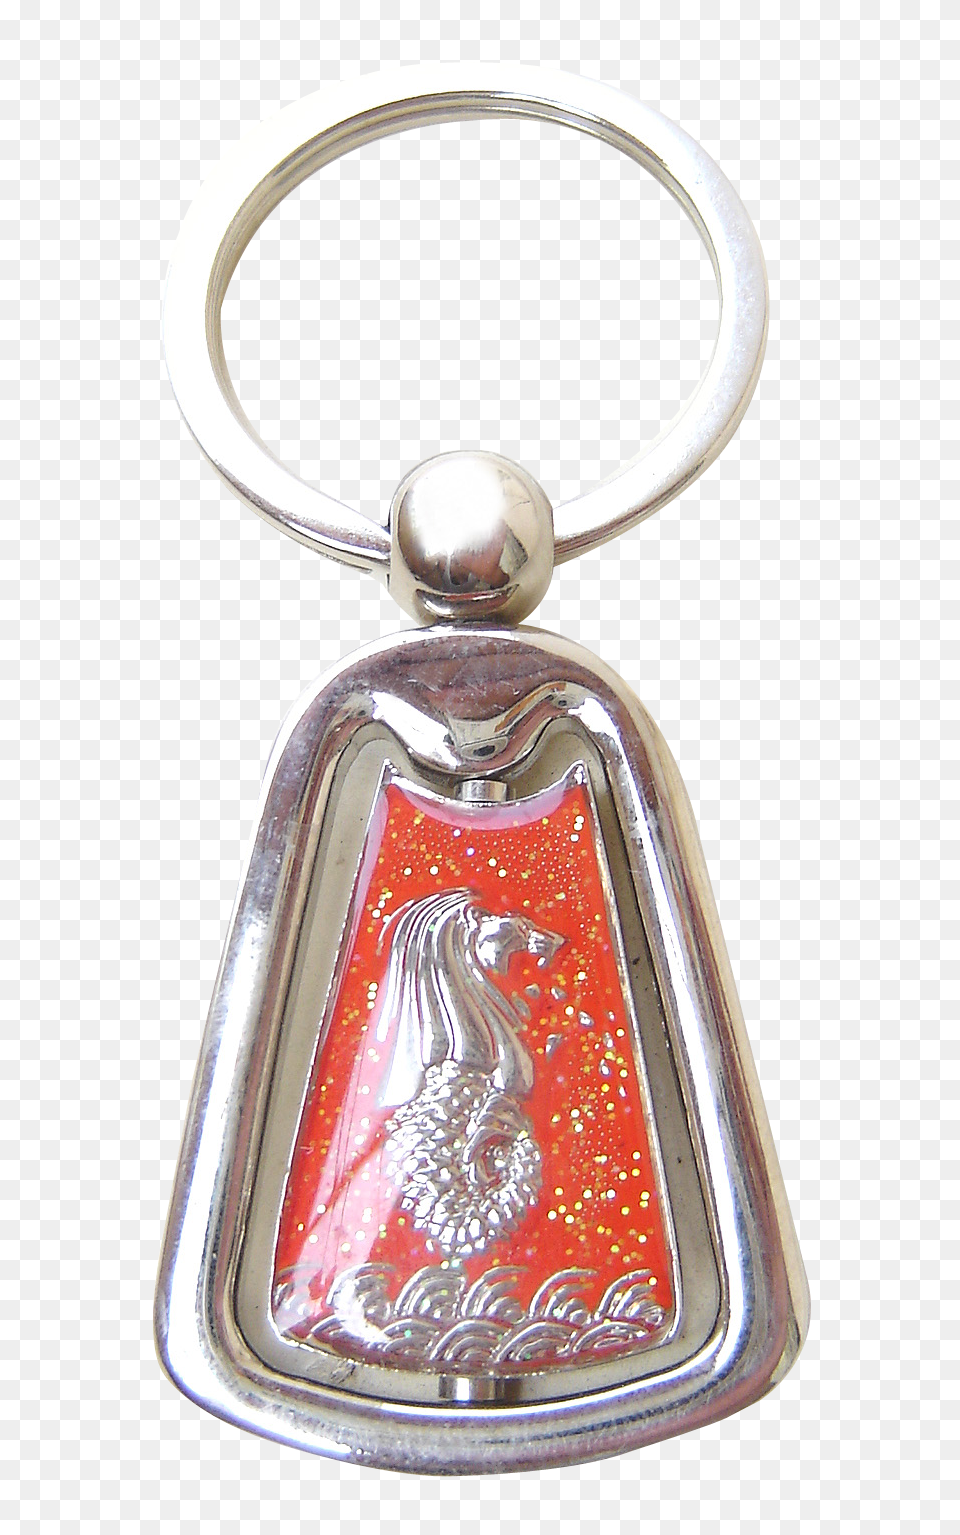 Pngpix Com Key Chain Transparent Image, Accessories, Jewelry, Necklace Free Png Download